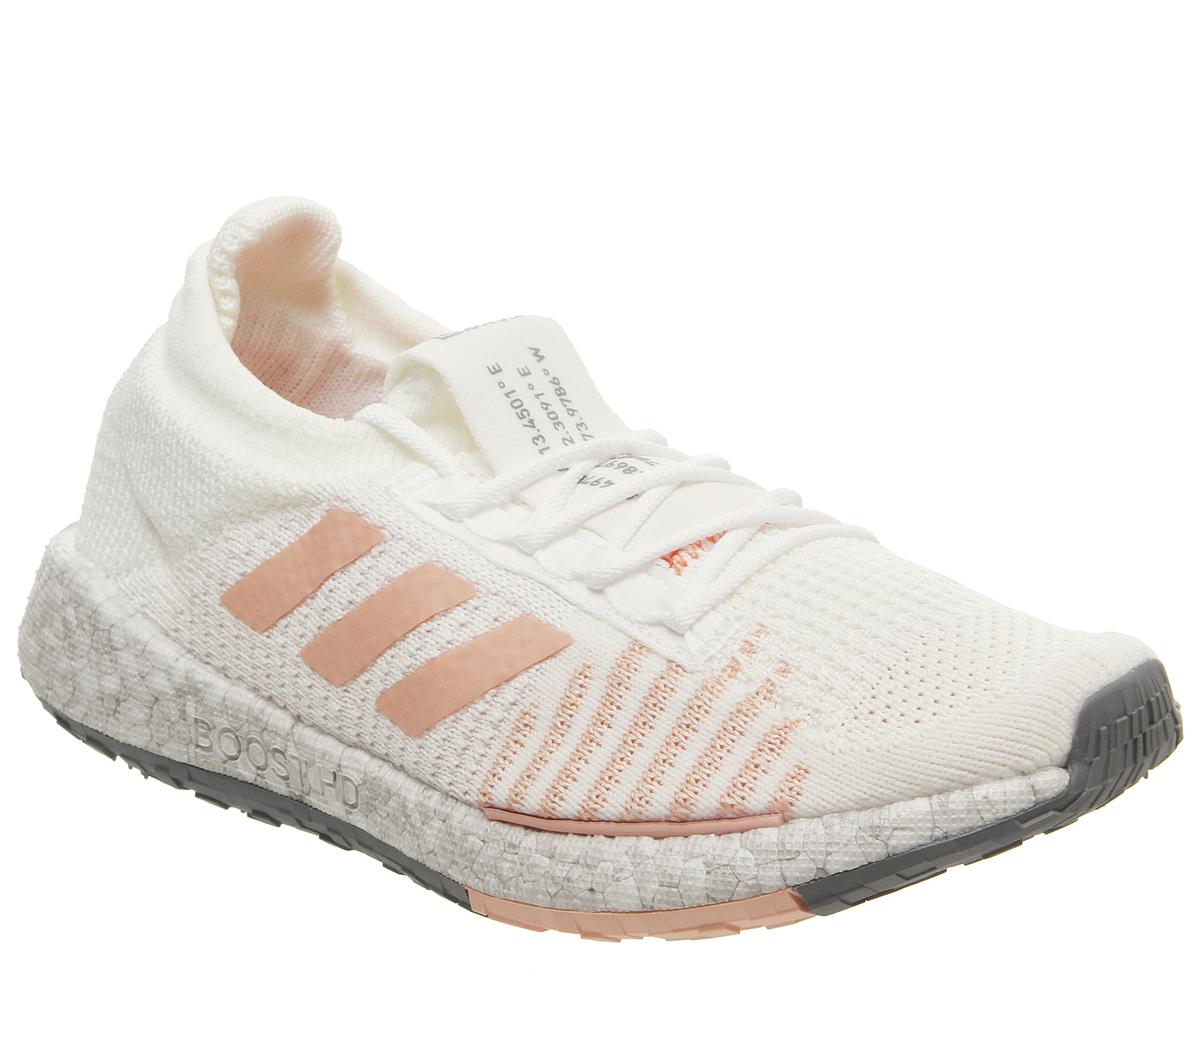 ultra boost white pink